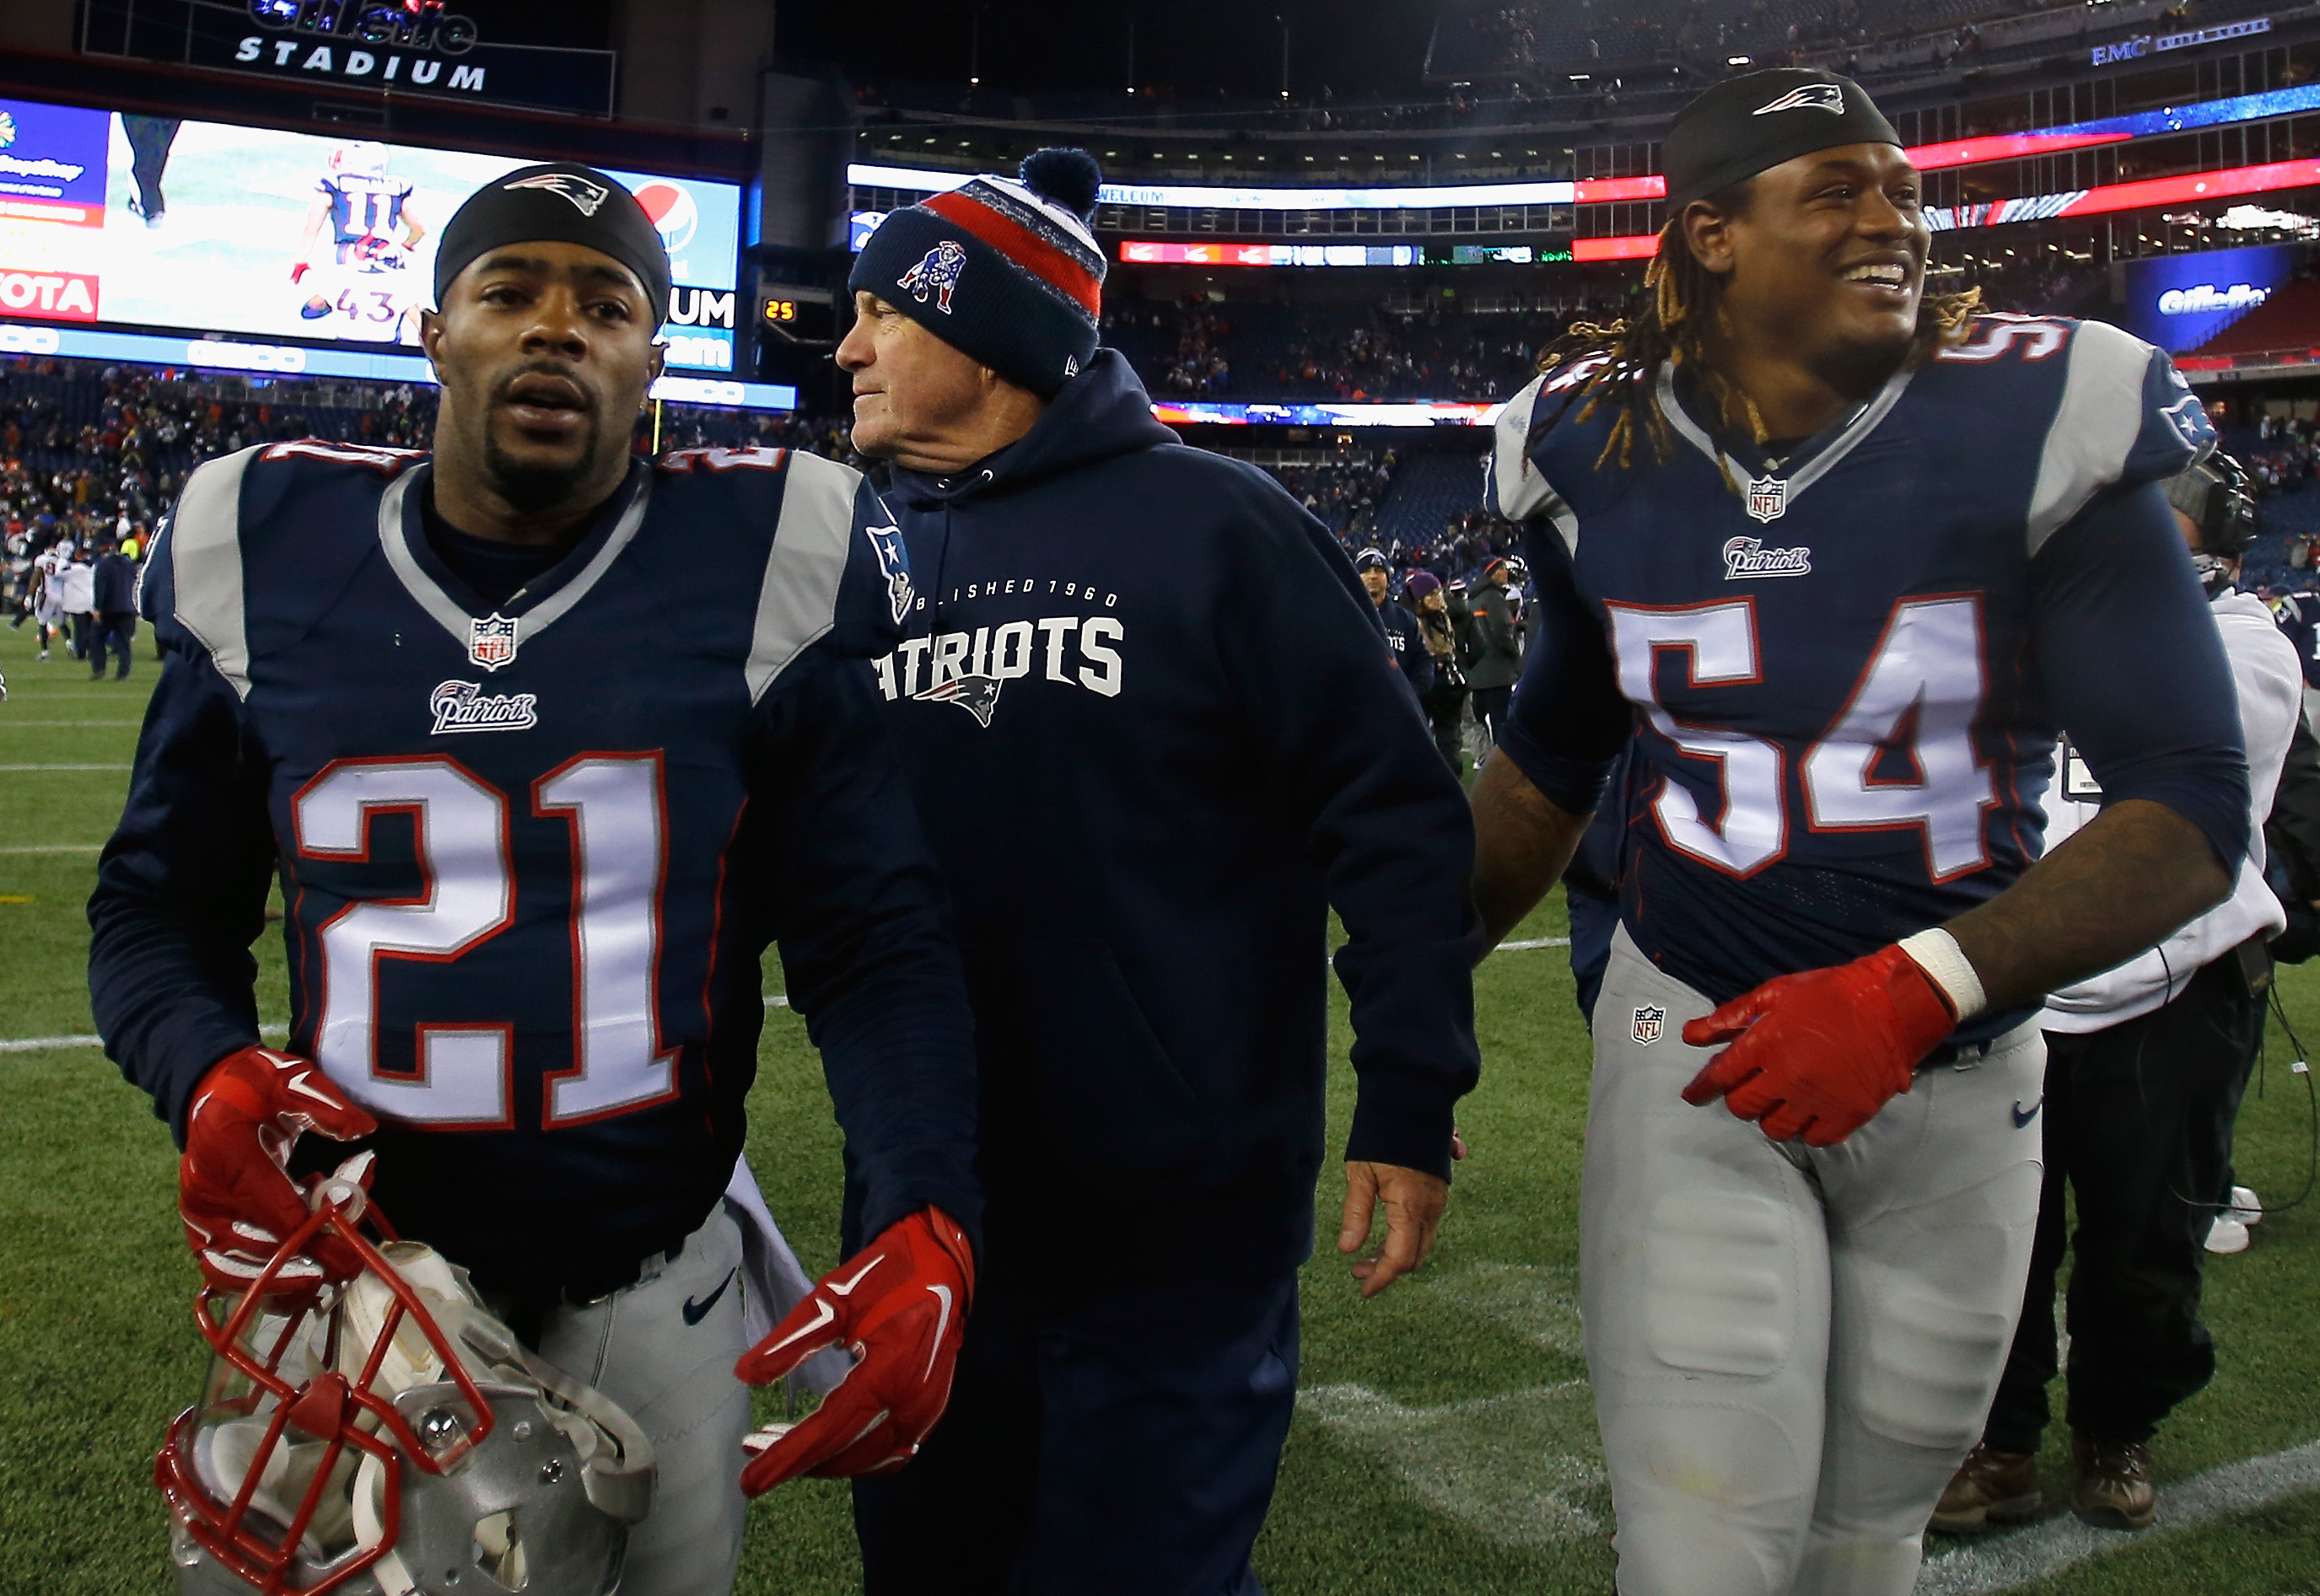 Malcolm Butler working 'for everything' in new No. 4 Patriots